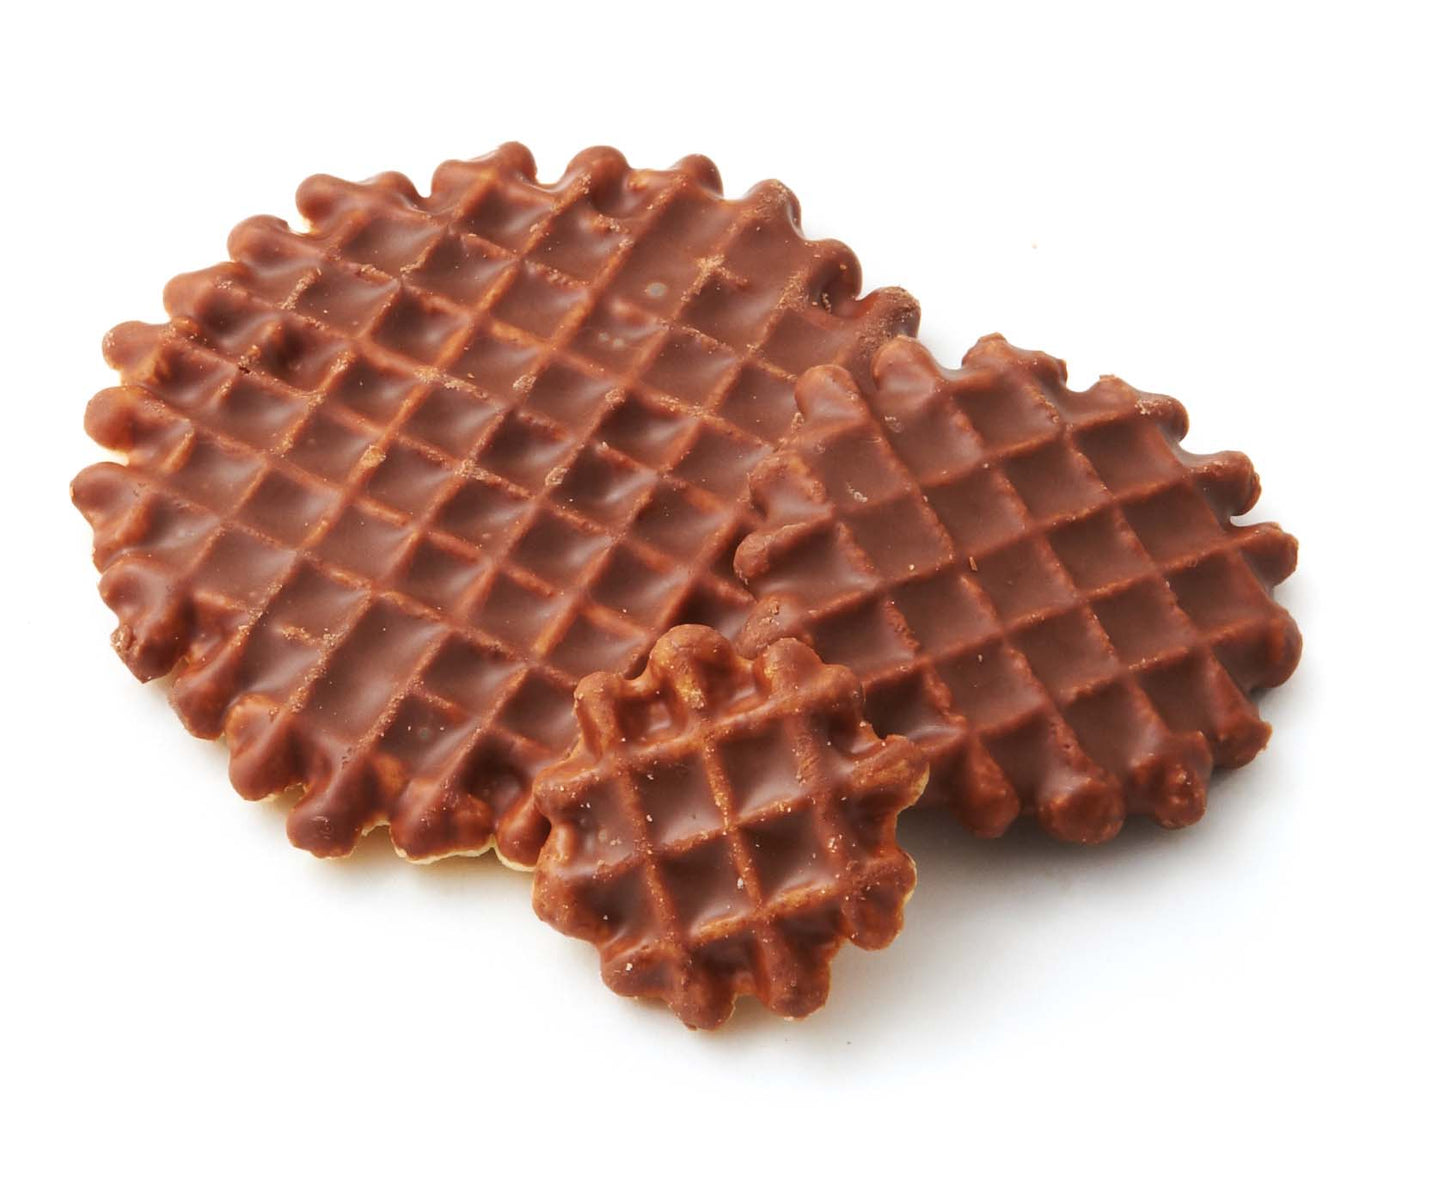 144 Count of Individually Wrapped (IW) Belgian Milk Chocolate Waffle Crisps (2 Packs) COMING SOON!